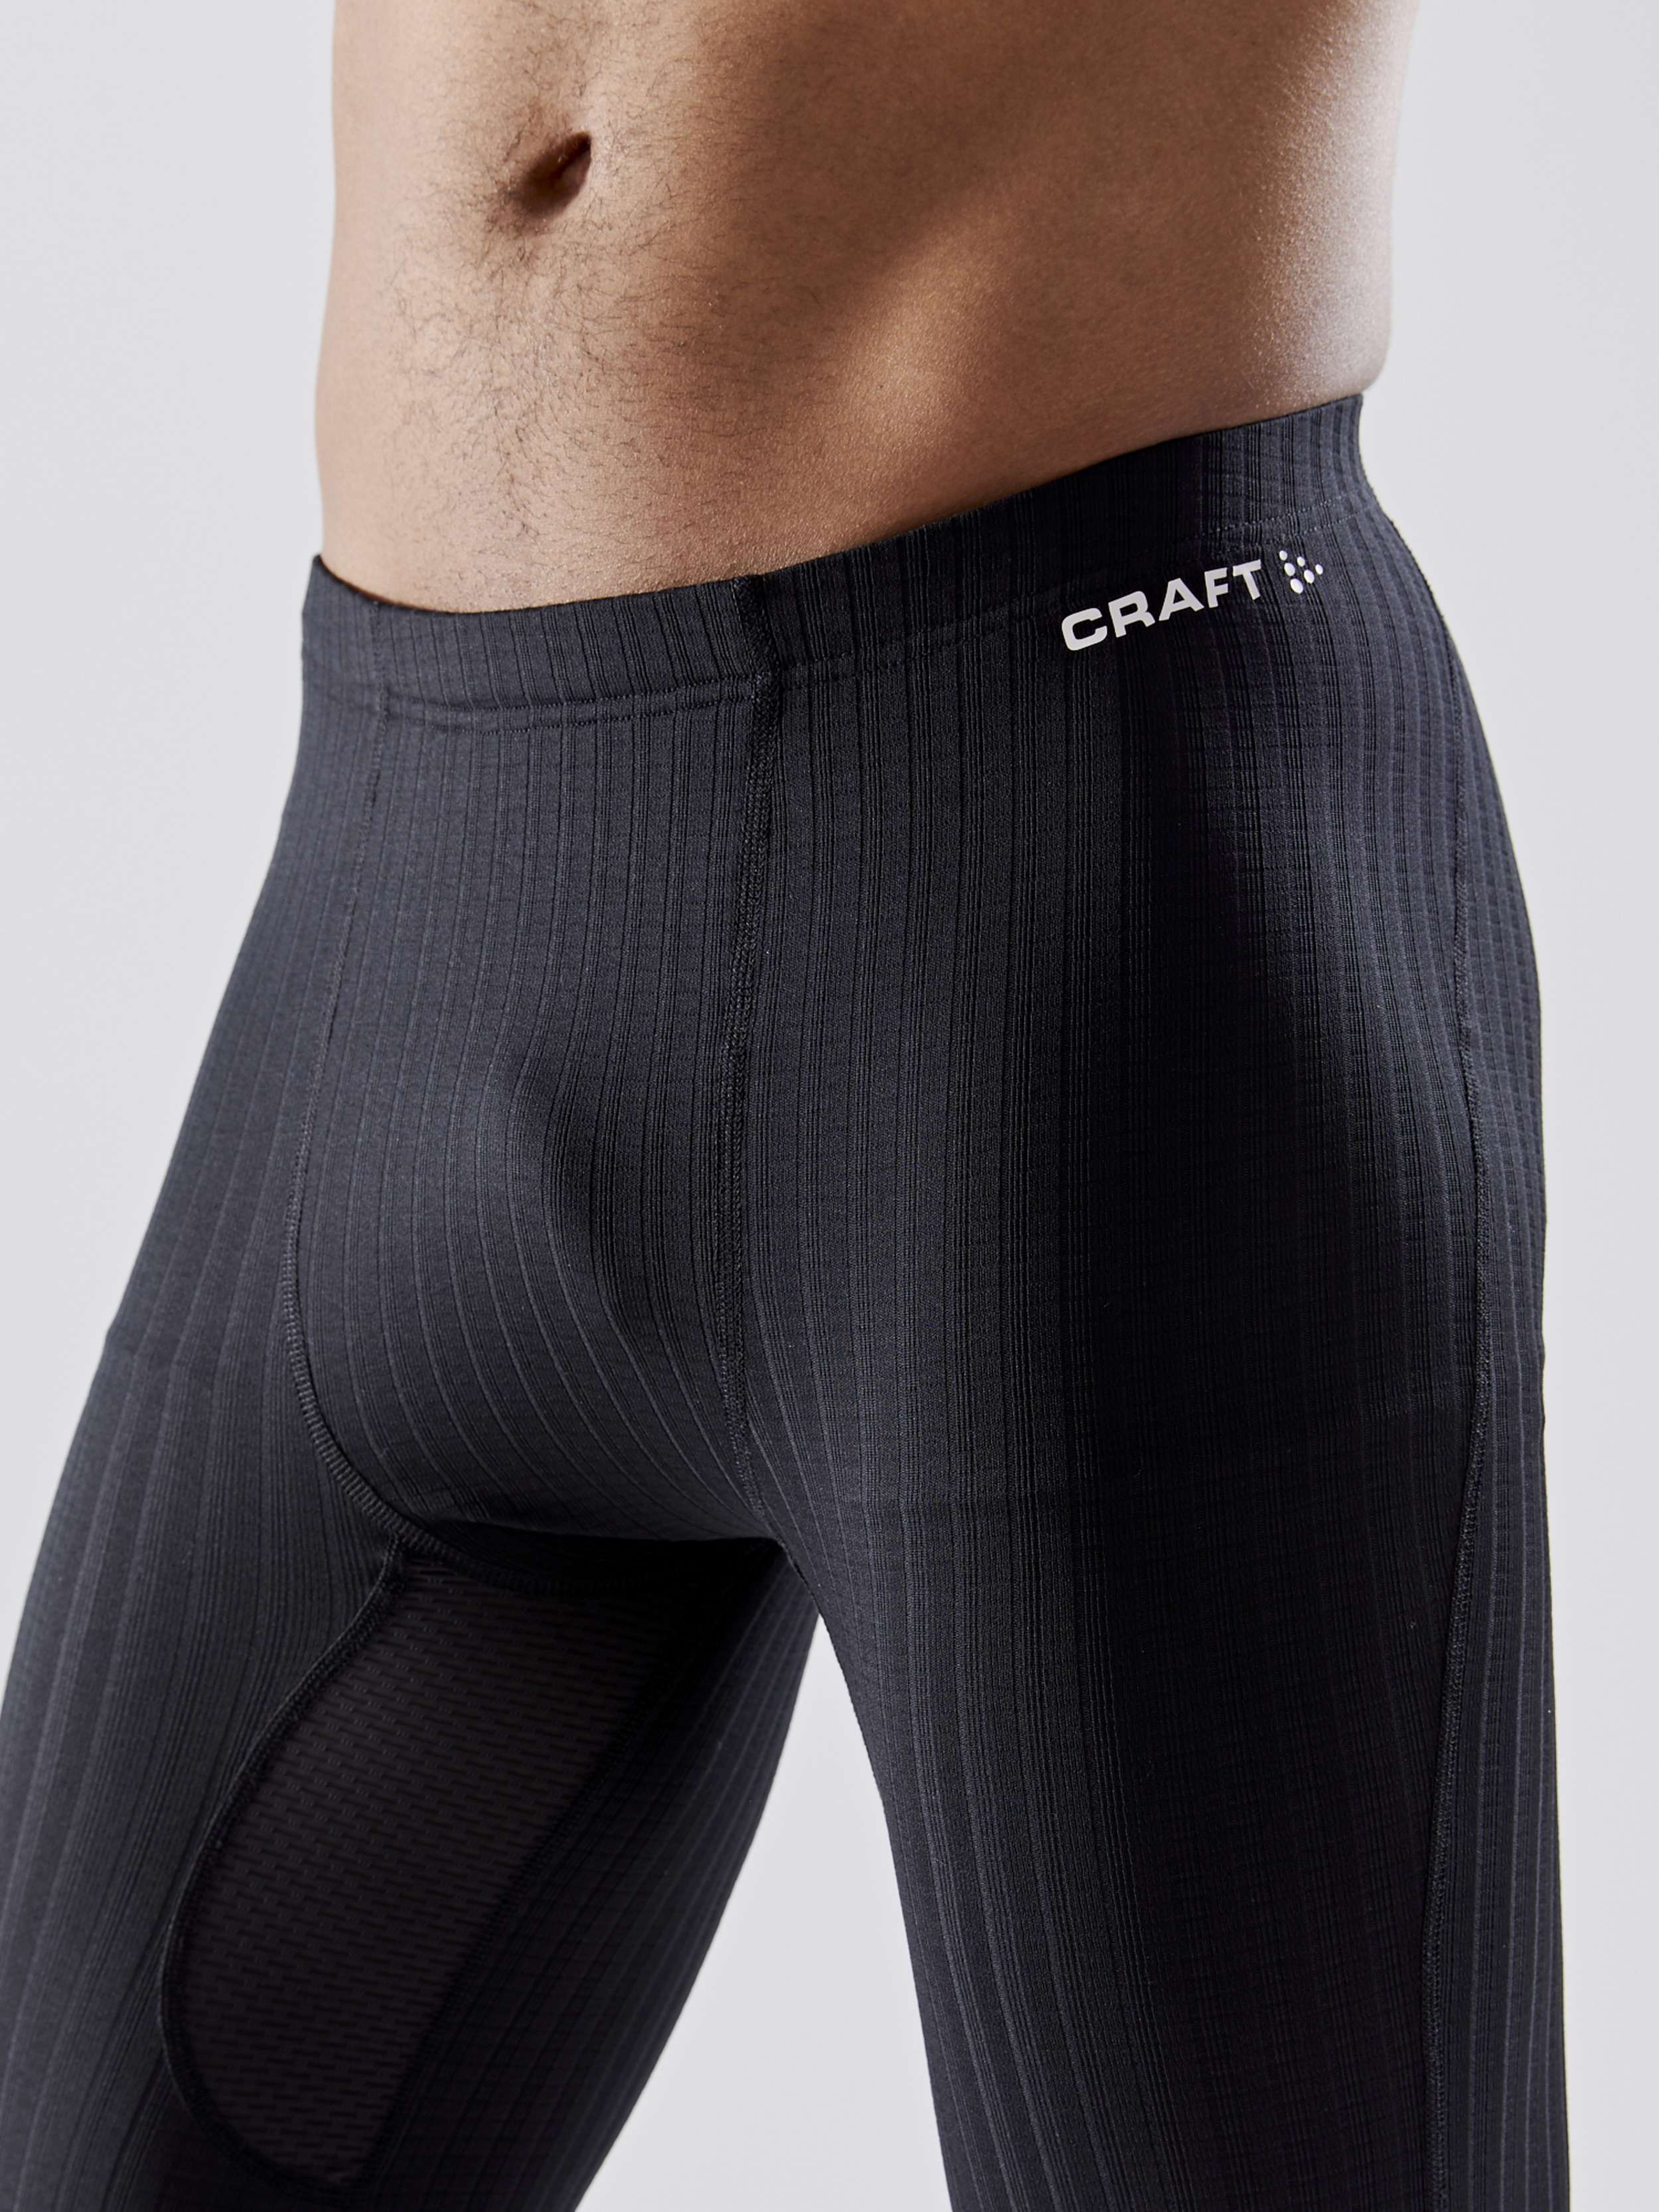 Craft Active Extreme 3 4 Men knickers taille M noir 